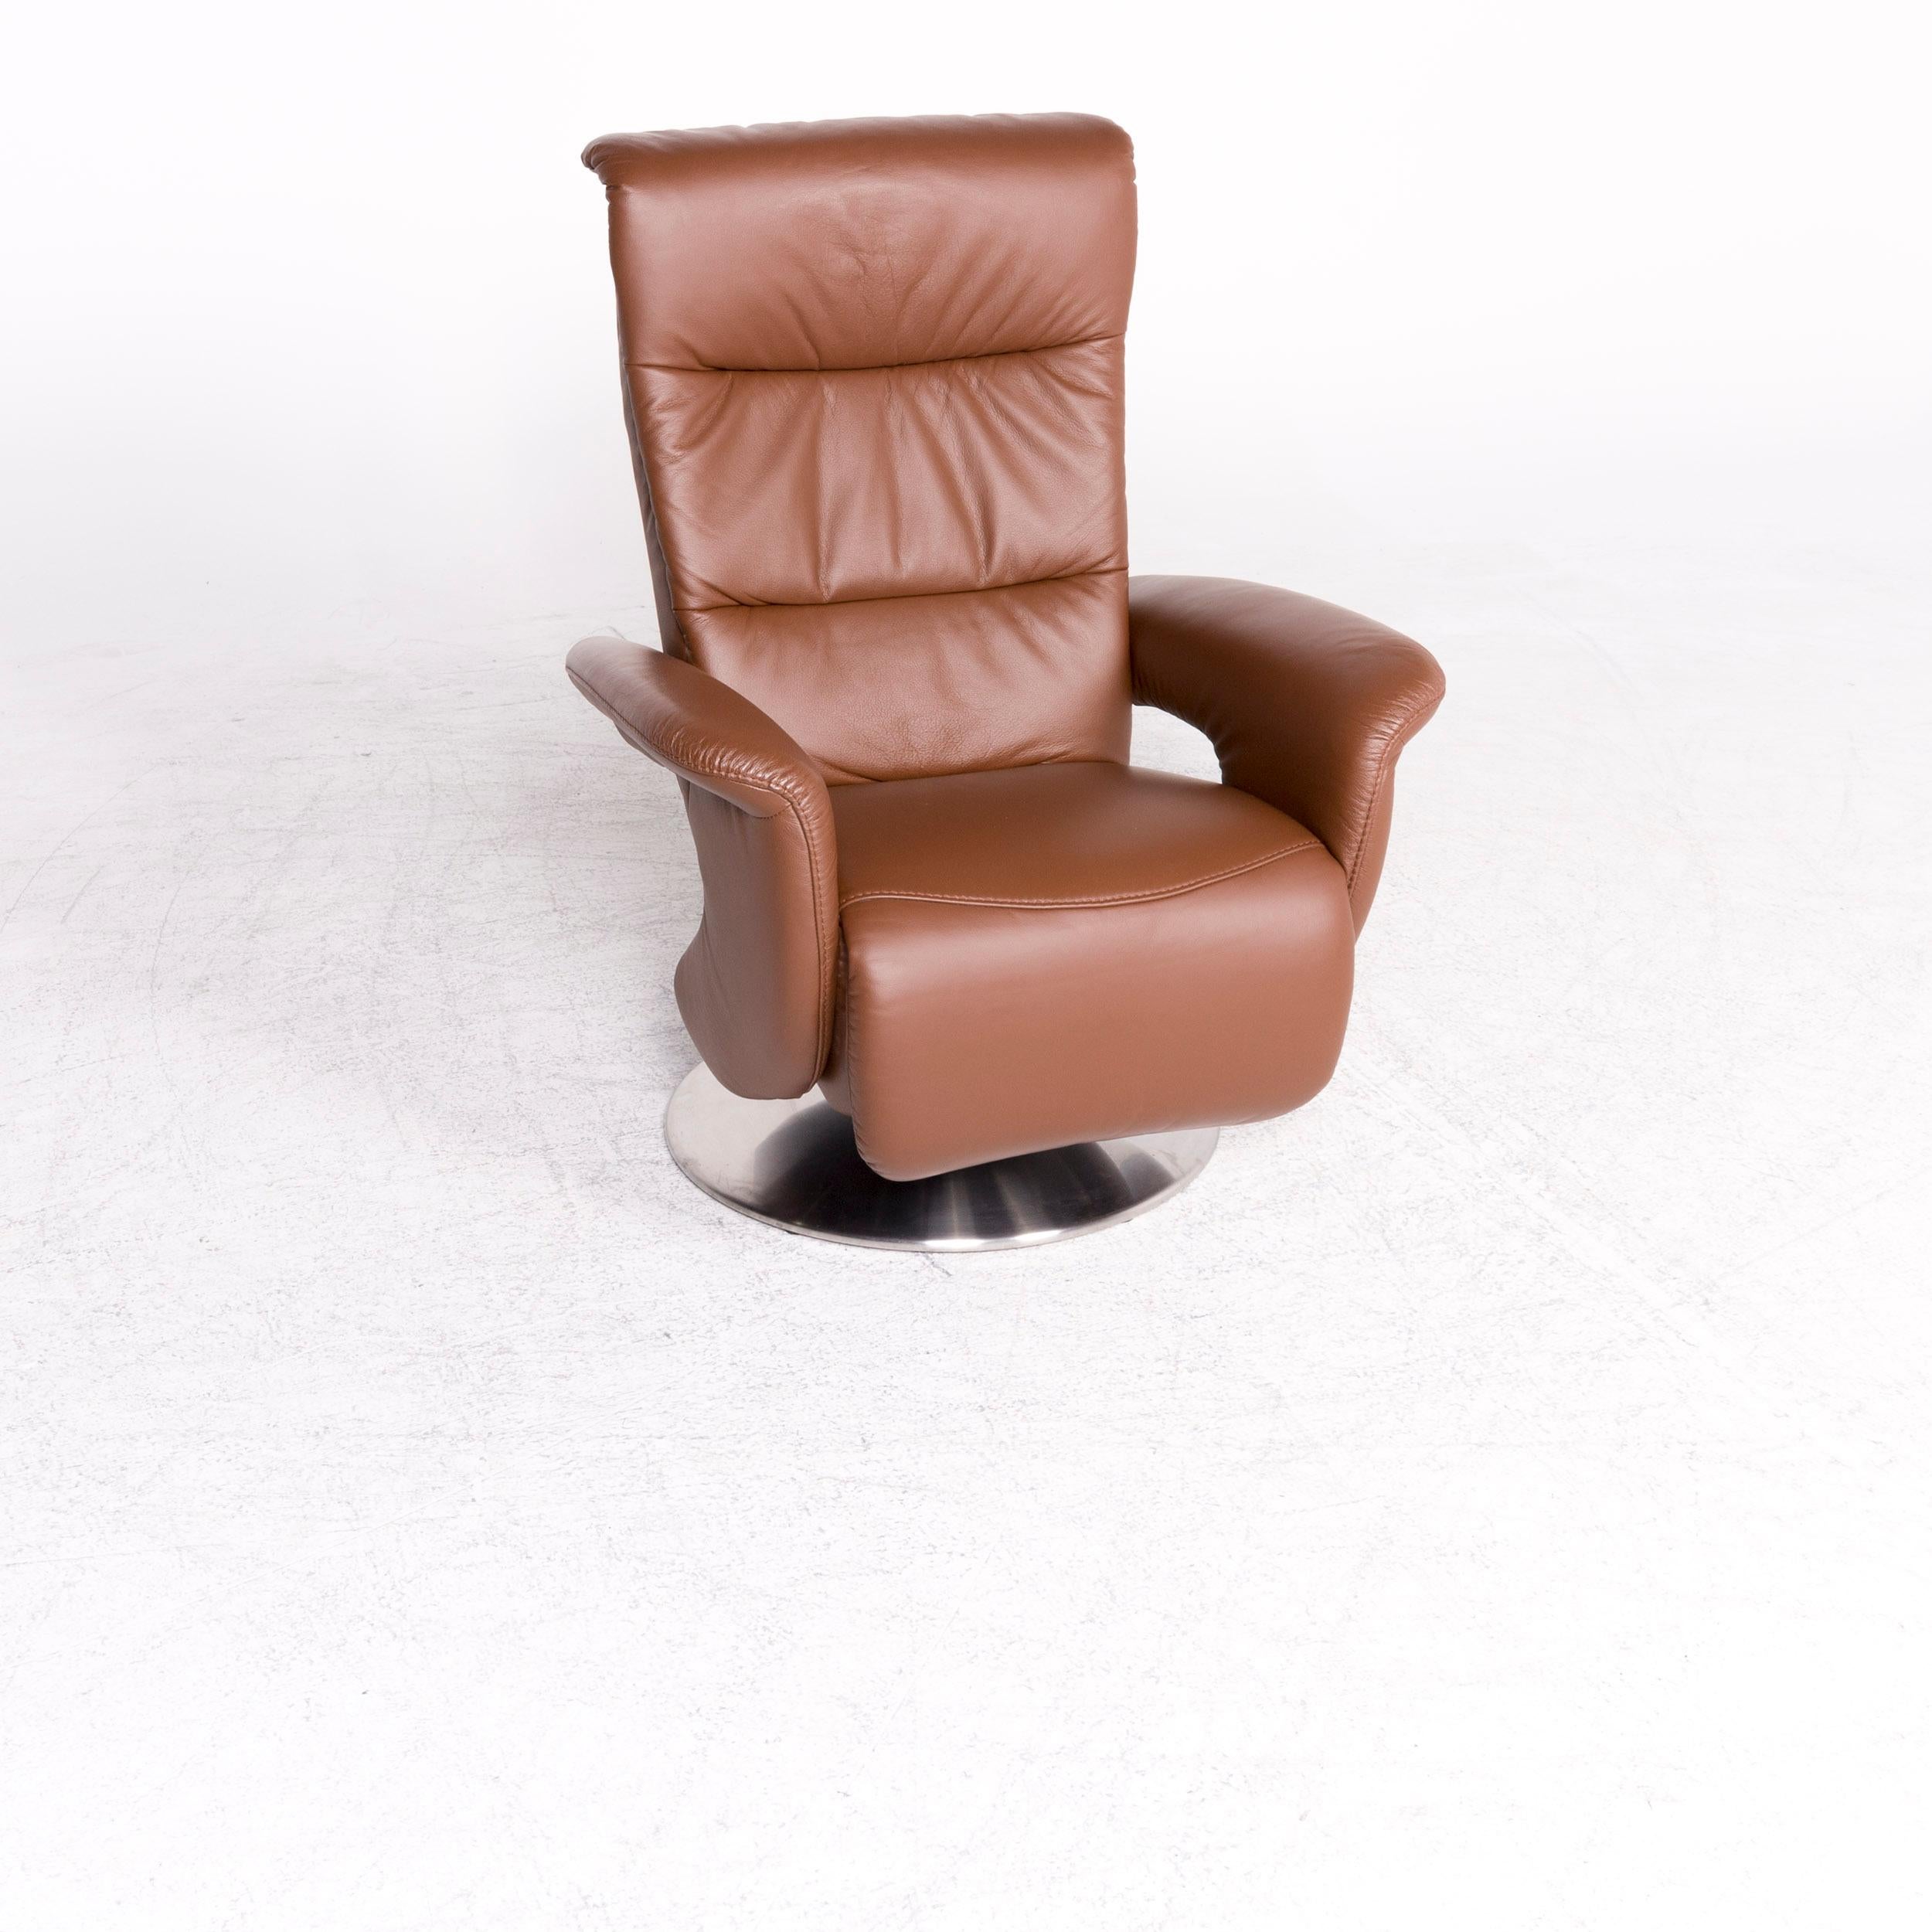 We bring to you a Himolla designer leather armchair brown genuine leather chair.

Product measurements in centimeters:

Depth 82
Width 80
Height 109
Seat-height 47
Rest-height 64
Seat-depth 47
Seat-width 50
Back-height 65.
  